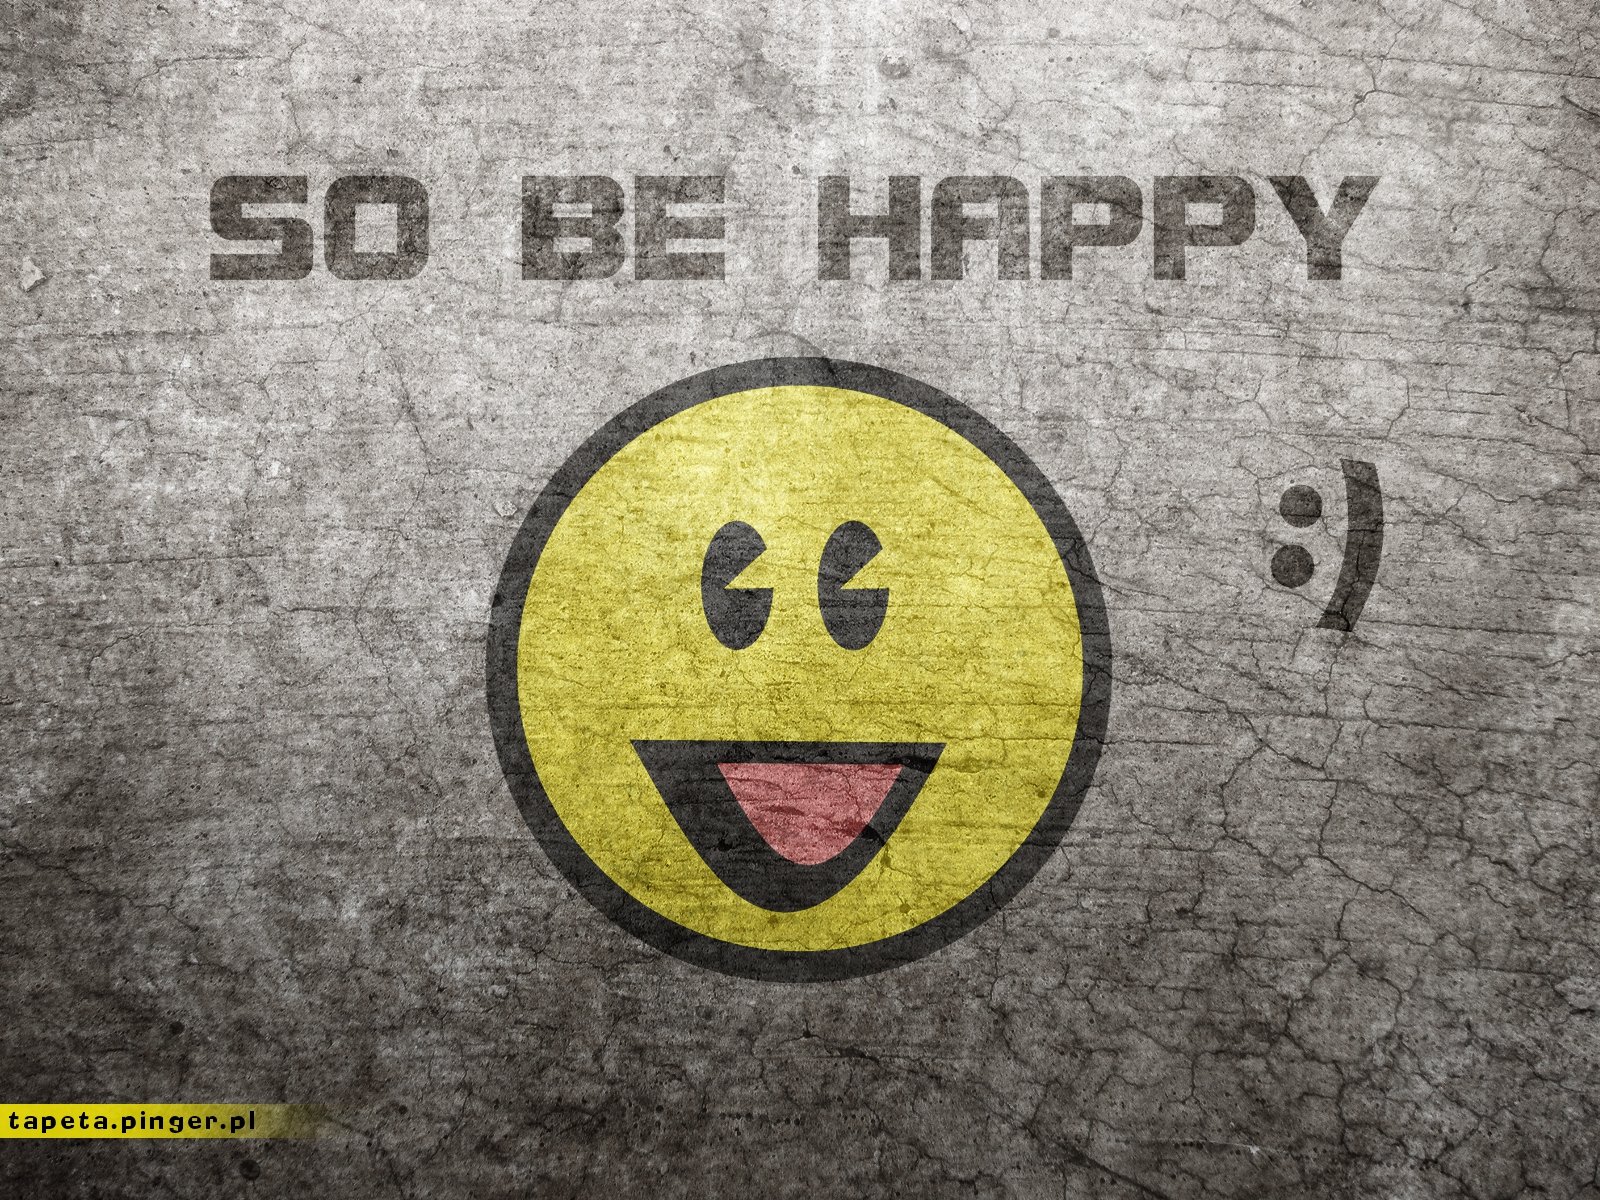 So be happy tapeta tapety wallpaper wallpapers smile umiech   Tapety